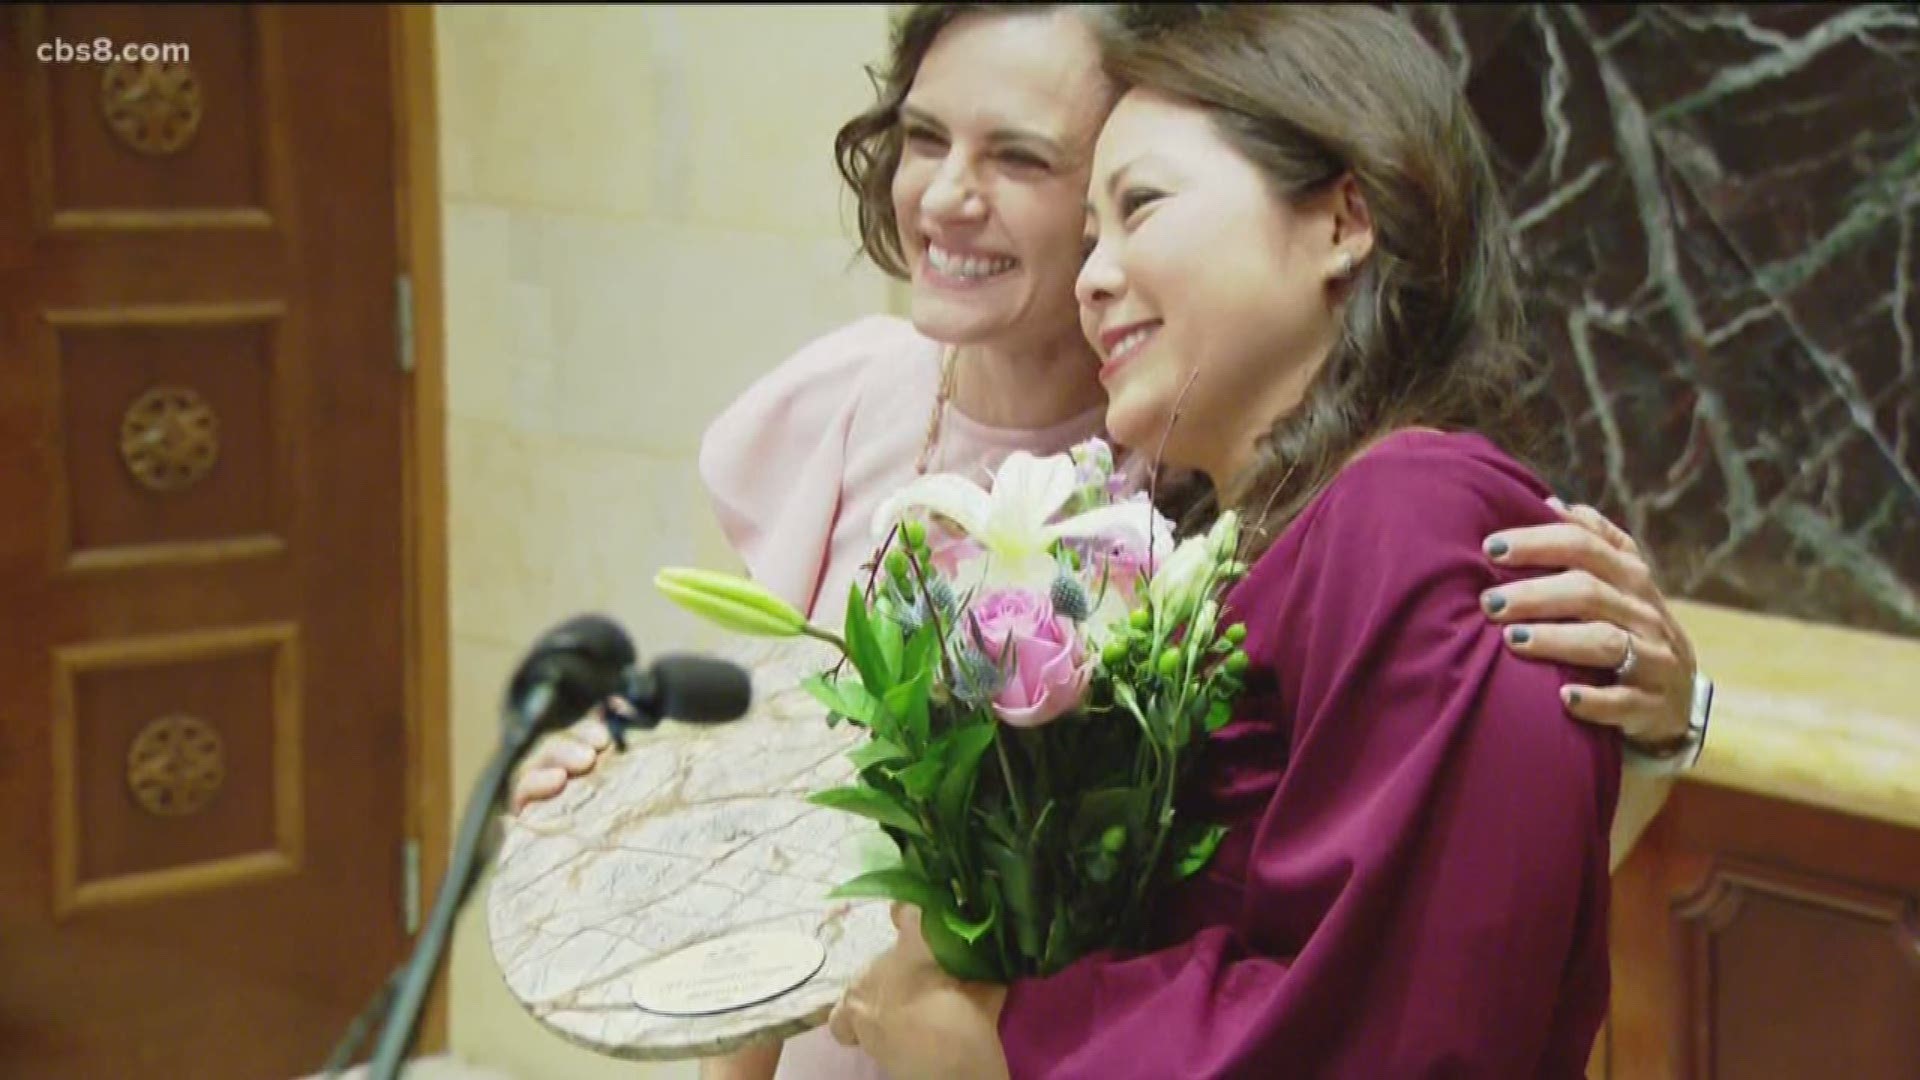 News 8’s Marcella Lee emceed the event, and was the recipient of the Cystic Fibrosis Foundation’s Community Champion Award, granted to someone who supports the CF Foundation without a direct familial connection to the disease.